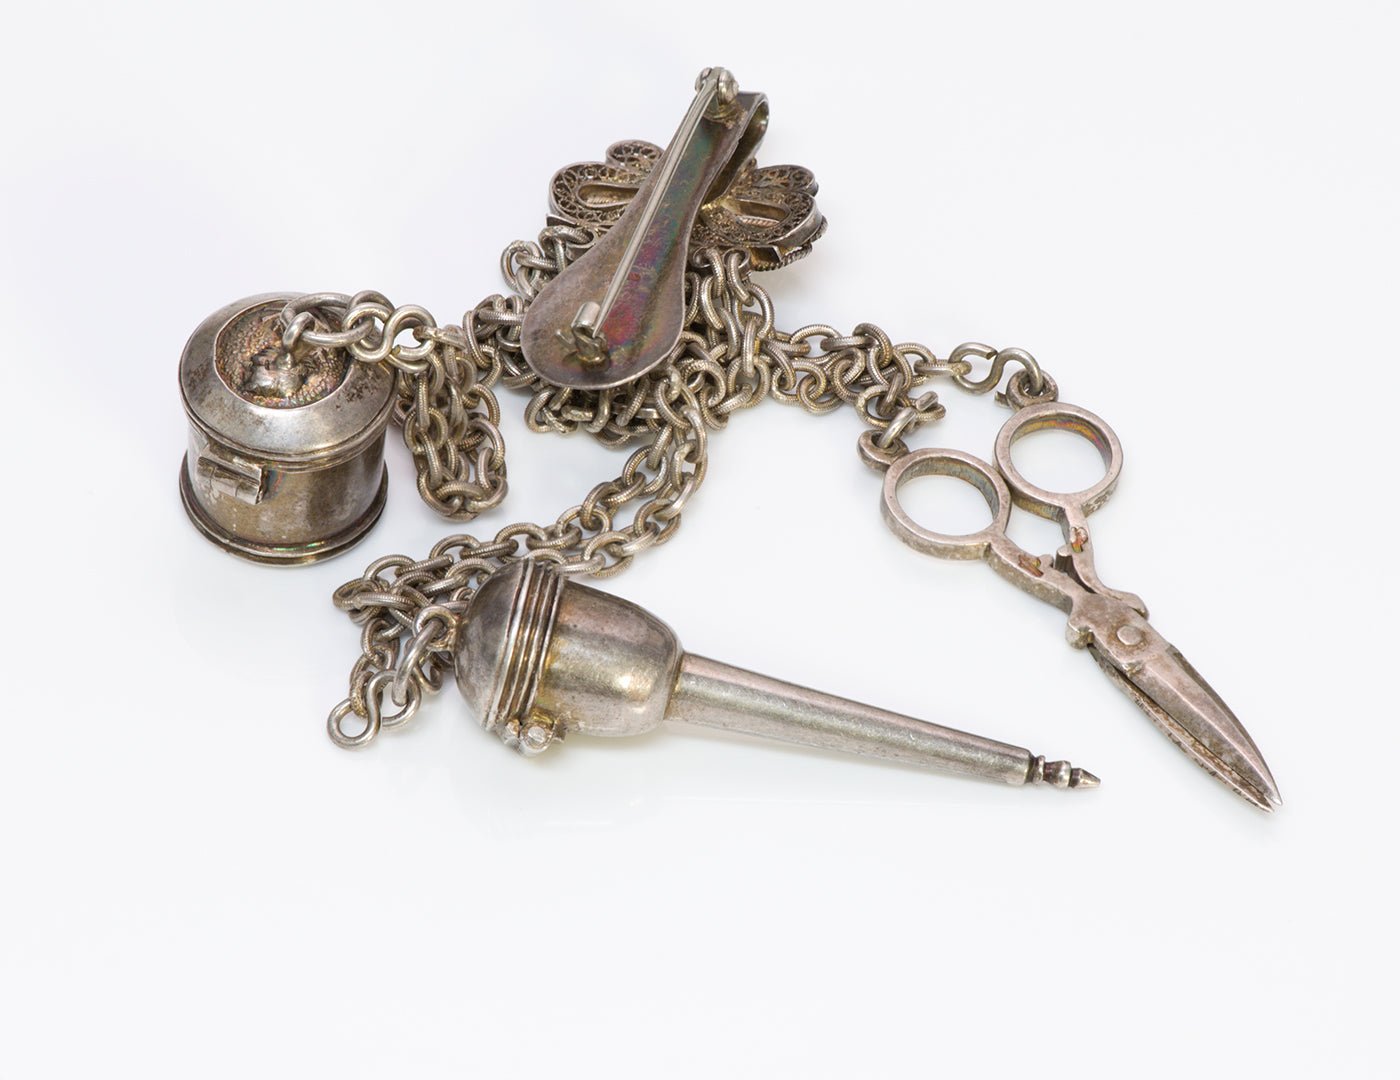 Antique Miniature Silver Chatelaine Sawing Items